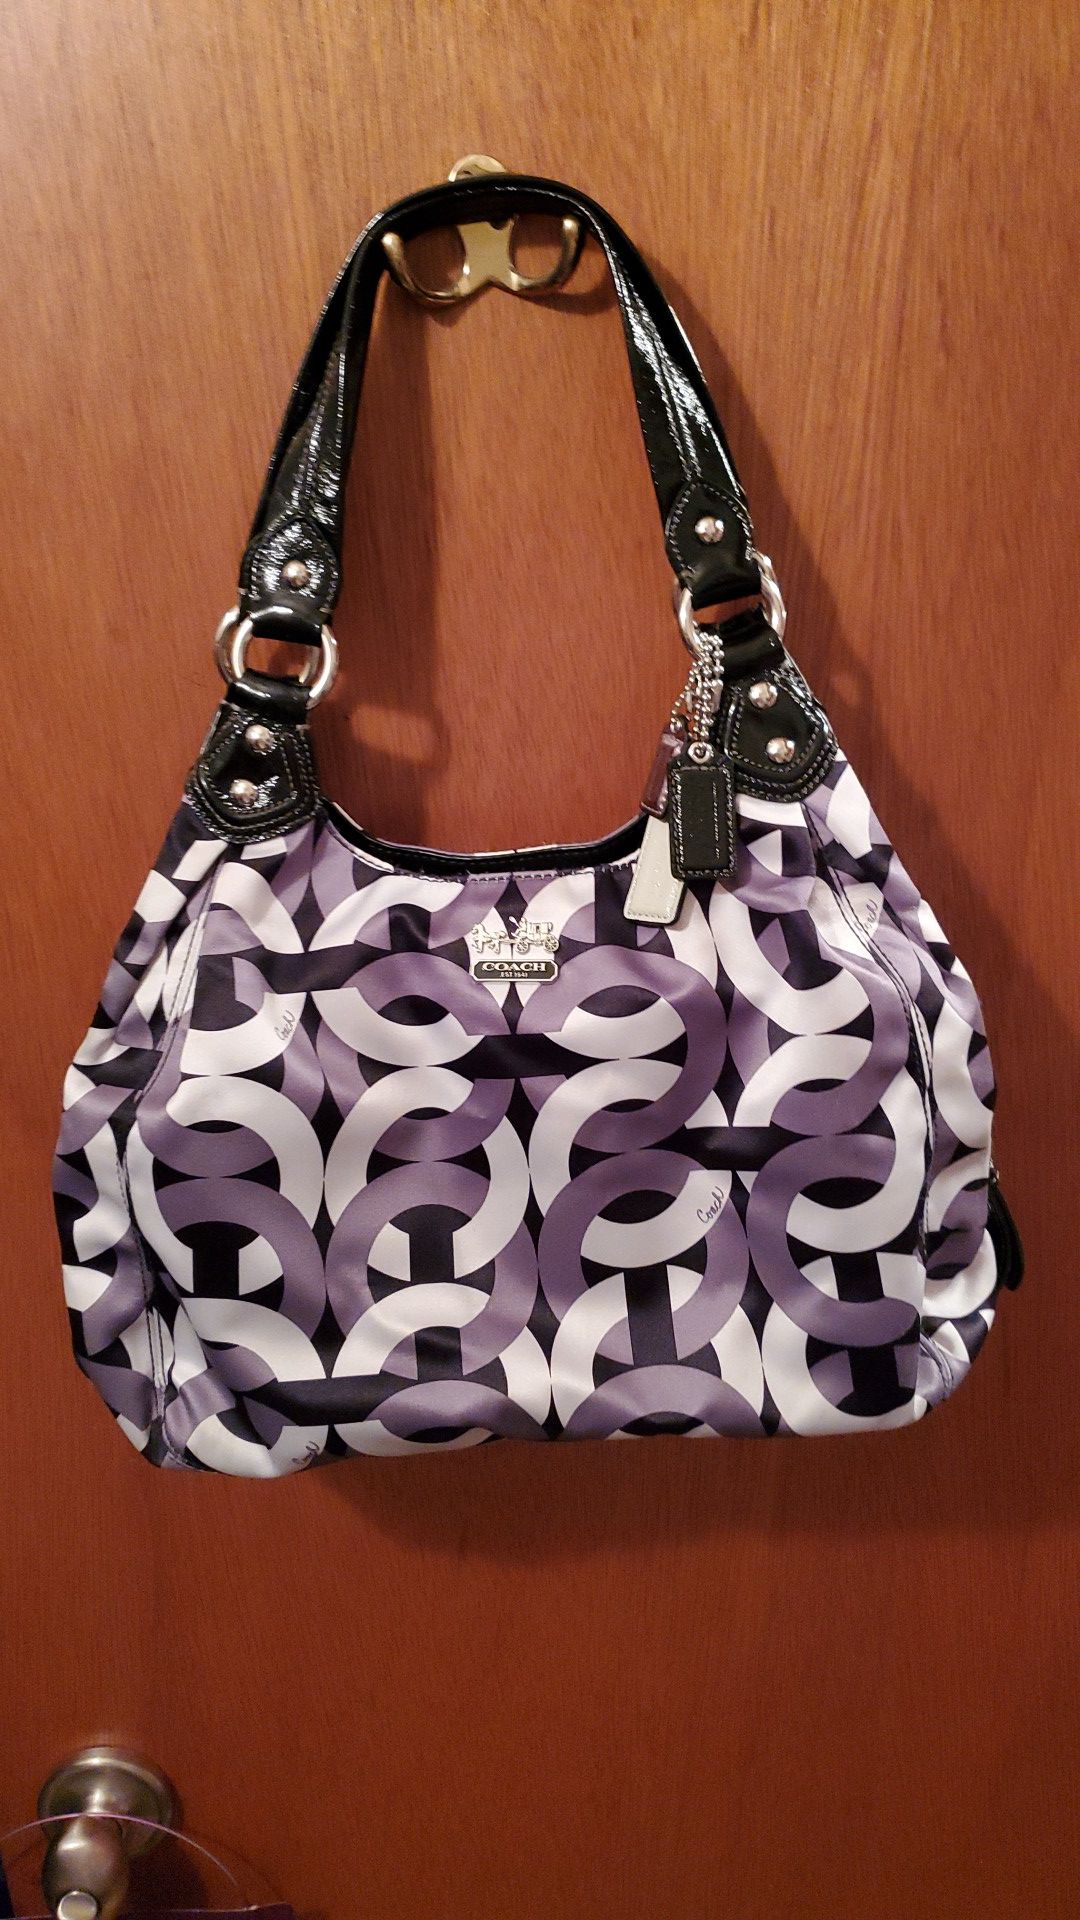 Coach Purse / Color is Gray, White and Black inside is Purple